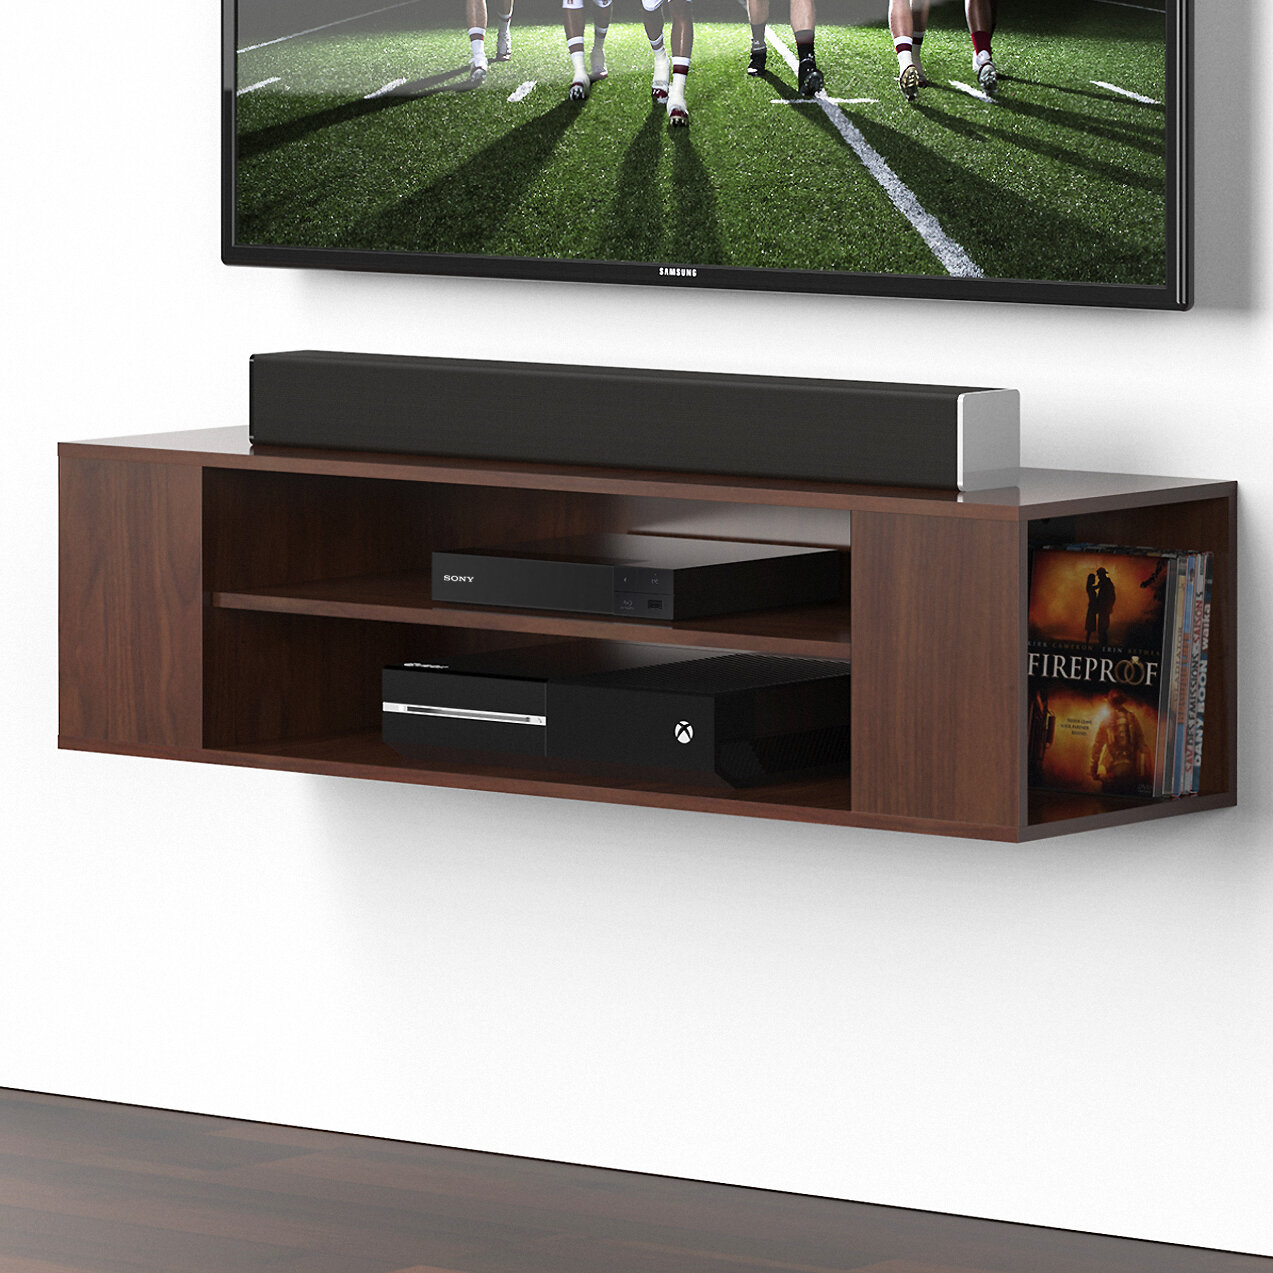 Fitueyes Wood Floating Shelves Wall Mount TV Stand Media Console For LCD Brown 